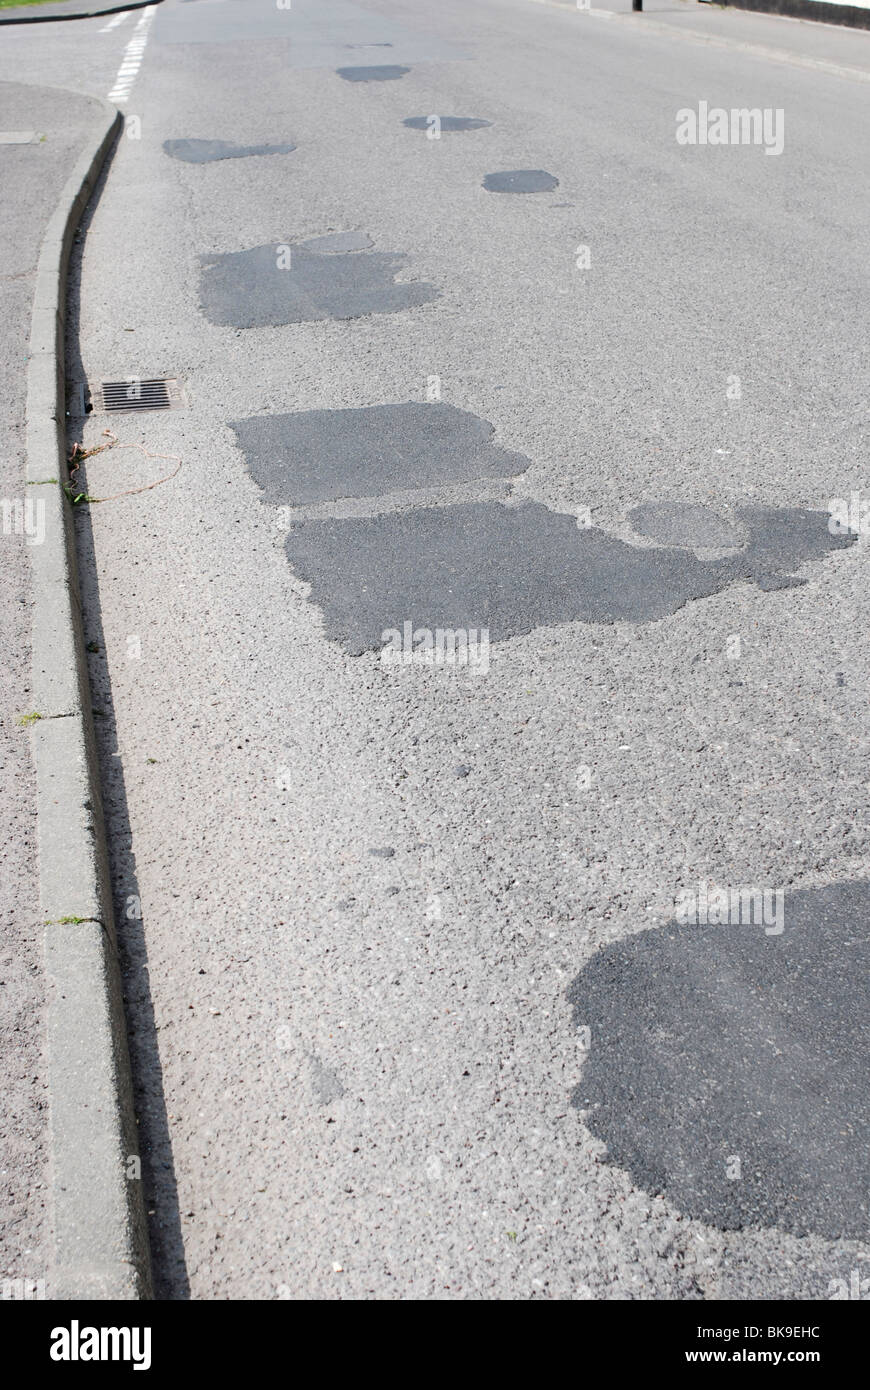 Patchwork repairs on a damaged road surface. Stock Photo